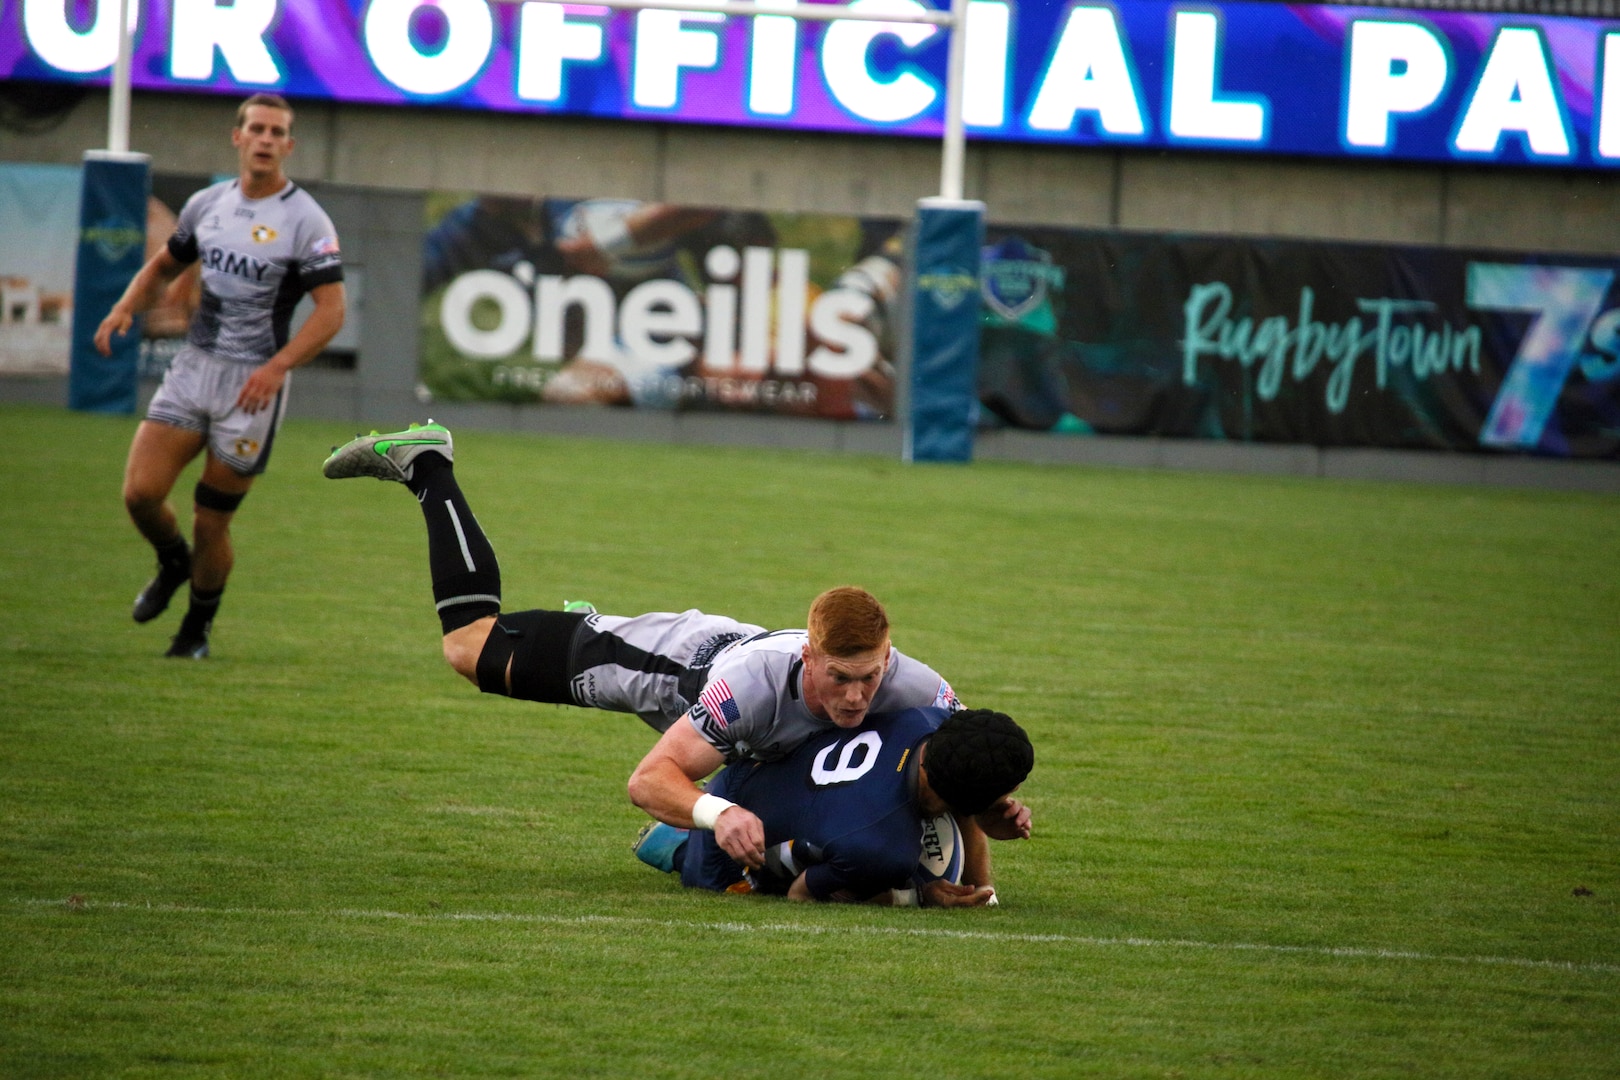 Army Capt. Luke Heun of Fort Benning, Ga. tackles Navy Lt. Adam D'Amico of NPTU Charleston, S.C. during the championship match of the 2022 Armed Forces Sports Men's Rugby Championship held in conjunction with the Rugbytown 7's Rugby Tournament in Glendale, Colo.  Championship features teams from the Army, Marine Corps, Navy, Air Force (with Space Force players), and Coast Guard. (Department of Defense photo by Mr. Steven Dinote).